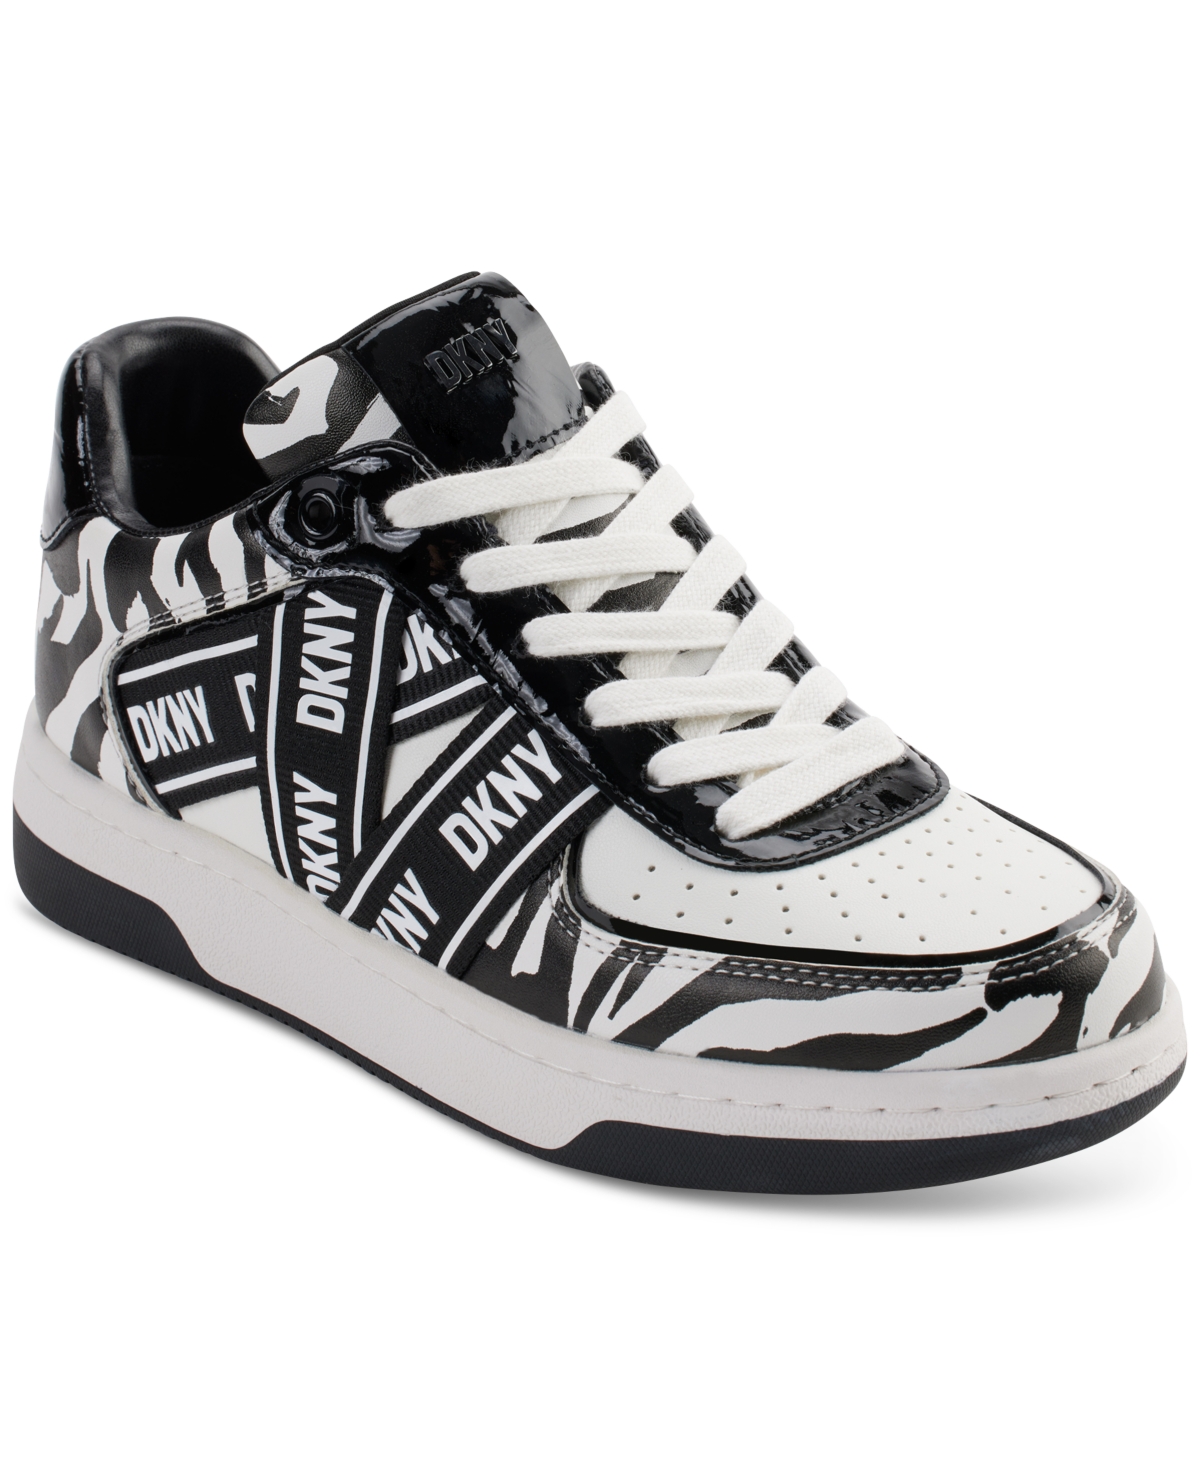 DKNY WOMEN'S OLICIA LACE-UP LOGO-STRAP SNEAKERS